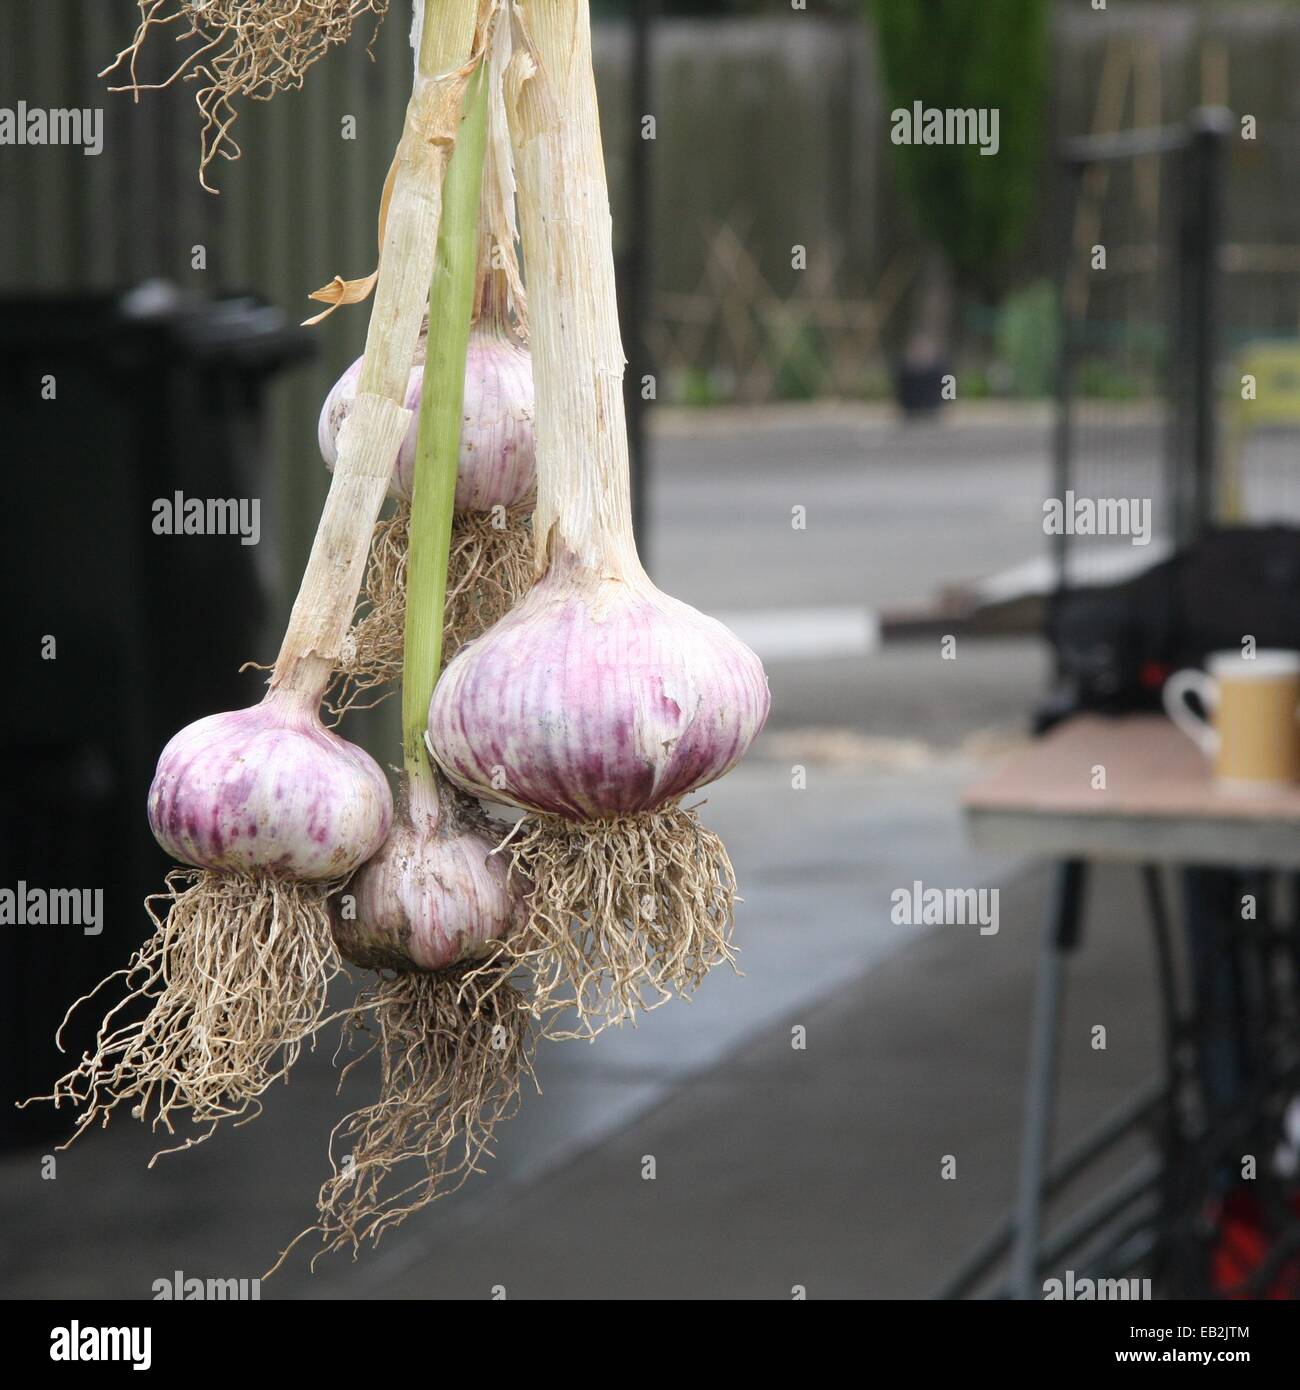 Braid Of Garlic Hung From Its Stalks To Dry Stock Photo